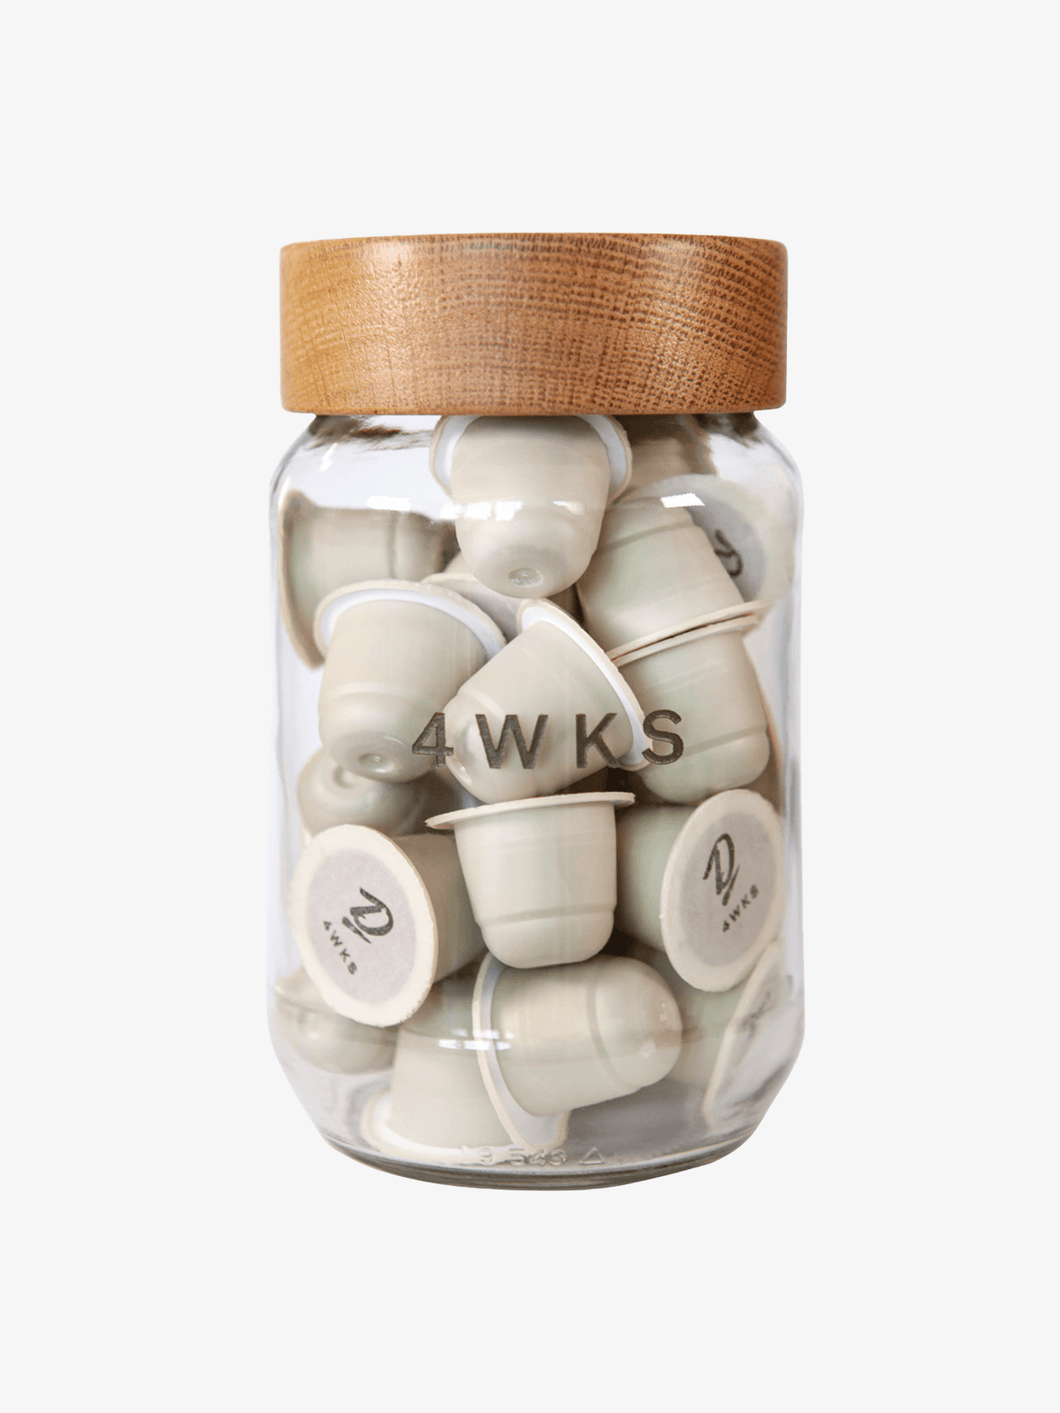 Deluxe 4WKS Coffee Capsules (compostable)